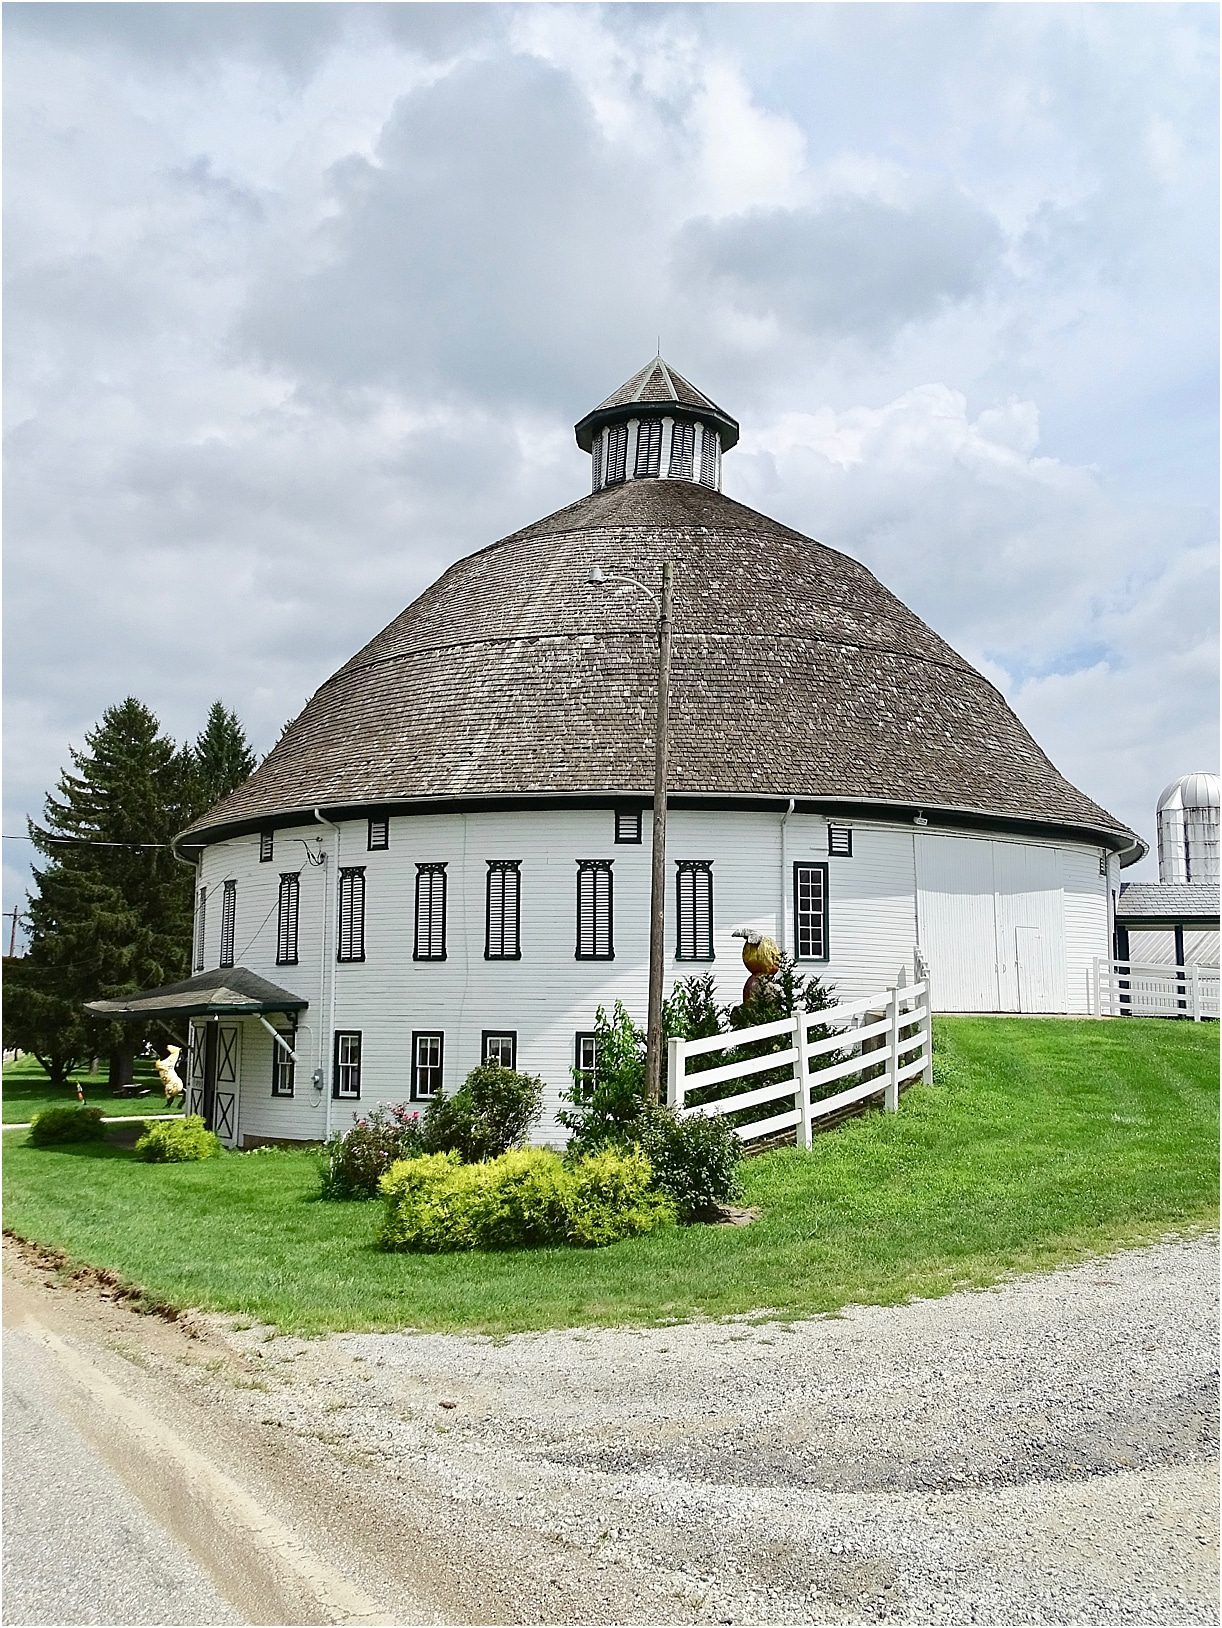 Hill City Bride | Getaway Weekend for Two | Travel for Couples Adams County Pour Tour Gettysburg Pennsylvania Thirsty Farmer Brew Works Round Barn